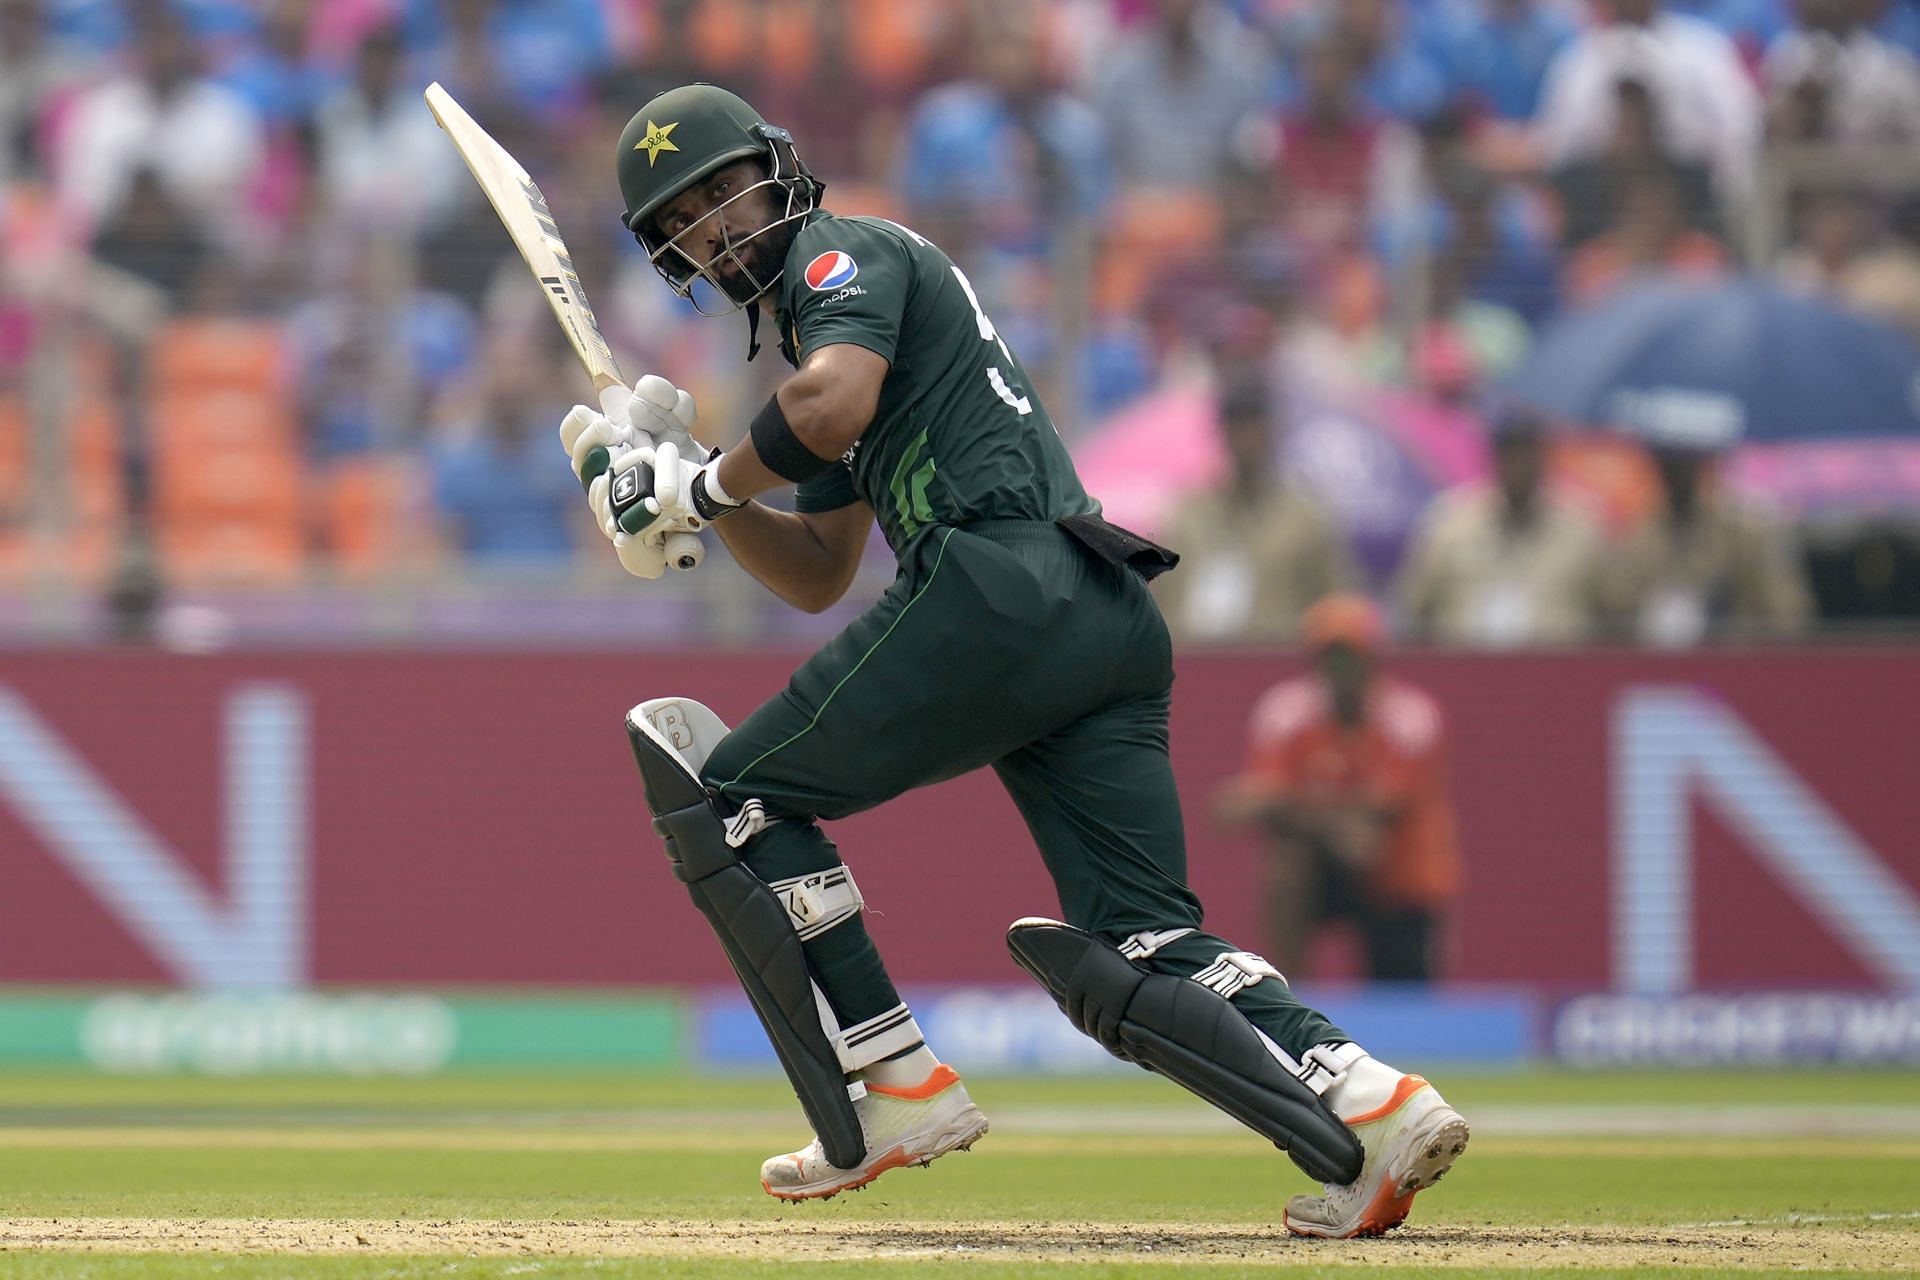 Abdullah Shafique has provided the requisite solidity at the top of the order for Pakistan. [P/C: AP]